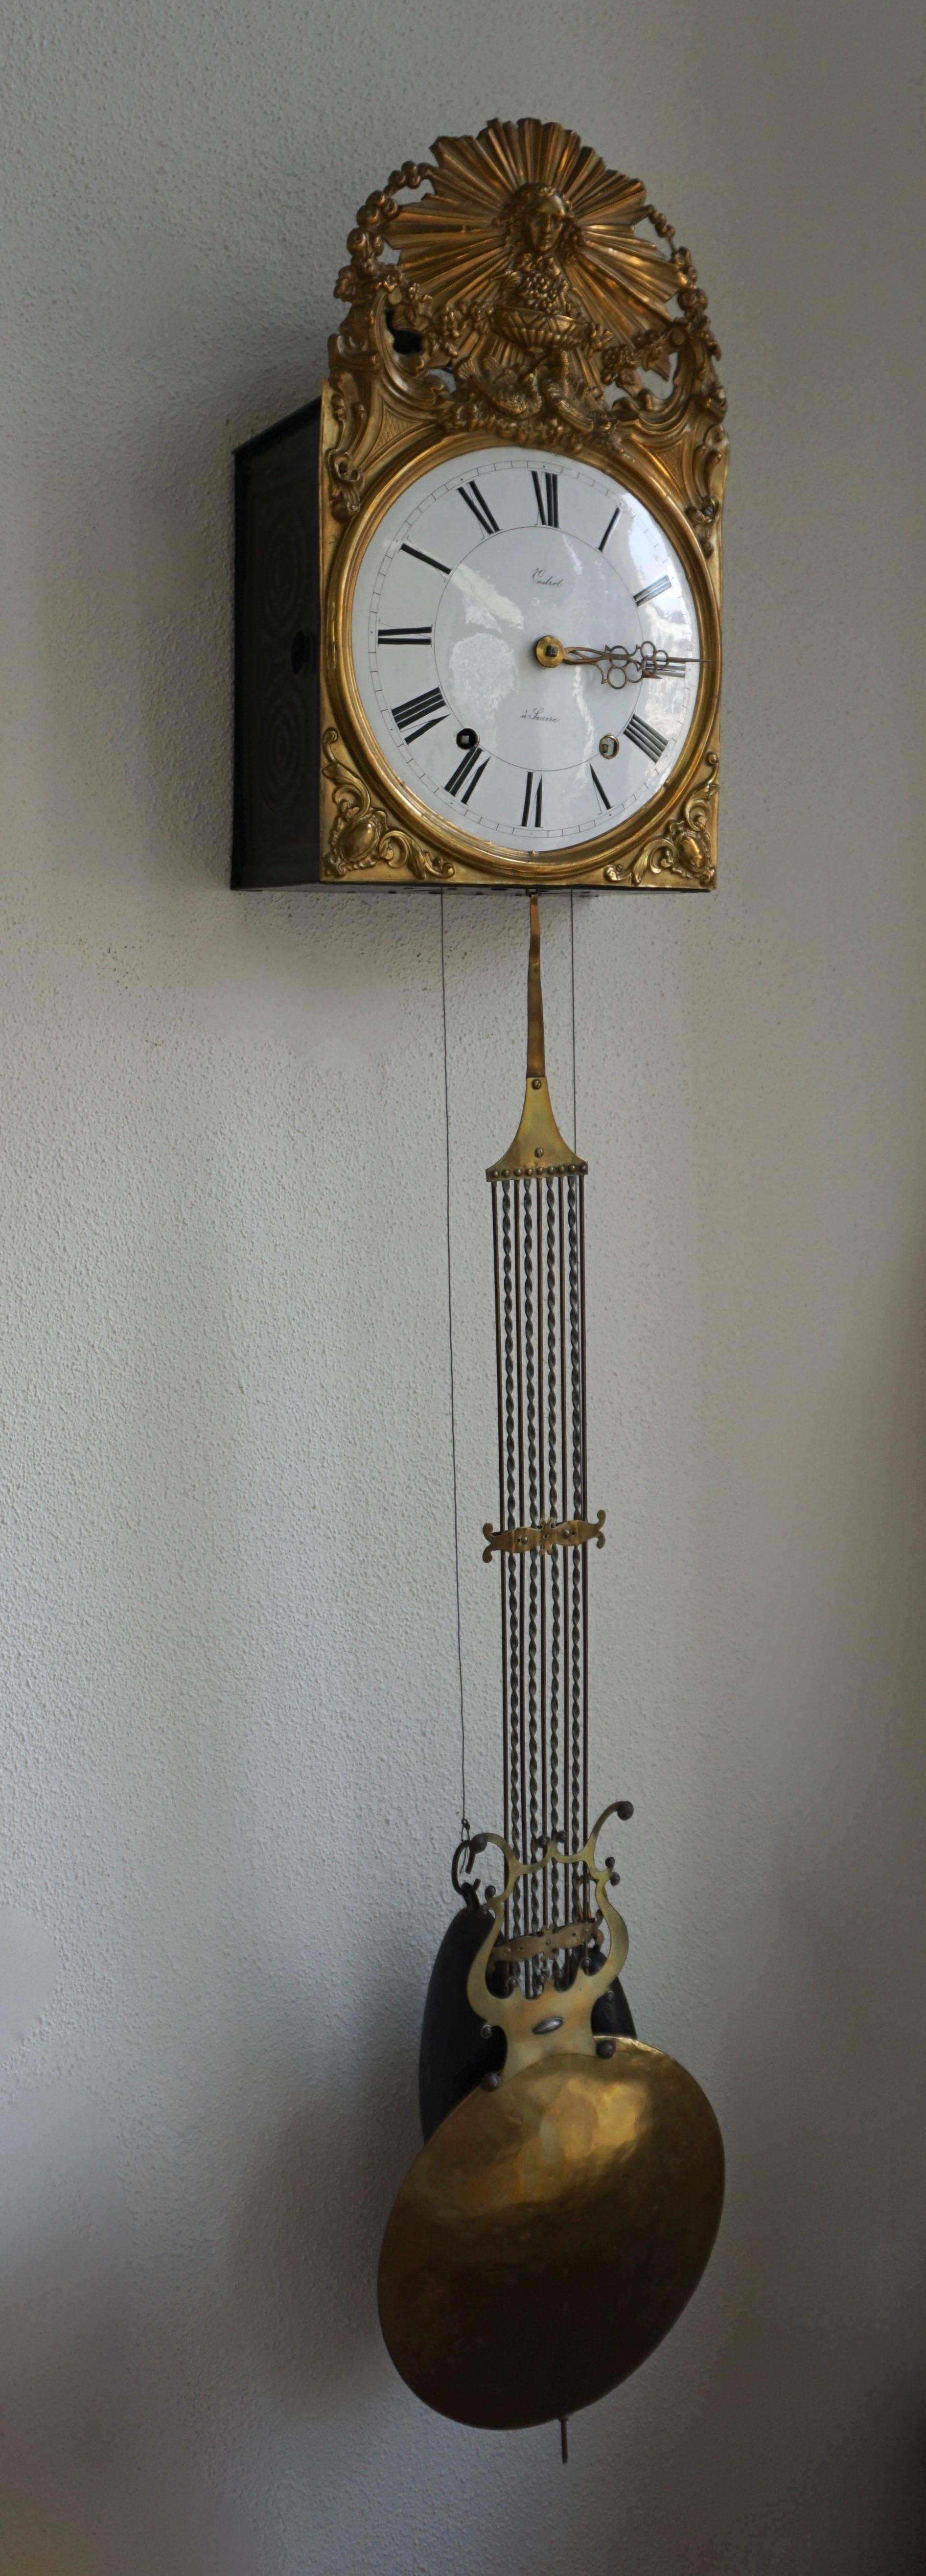 This two weight driven clock shows a white enameled dial with black Roman numerals surrounded by an embossed brass facade. The pendulum is also in brass and in lyre shape.

The clock strikes the hour-two times within two minutes and also the half